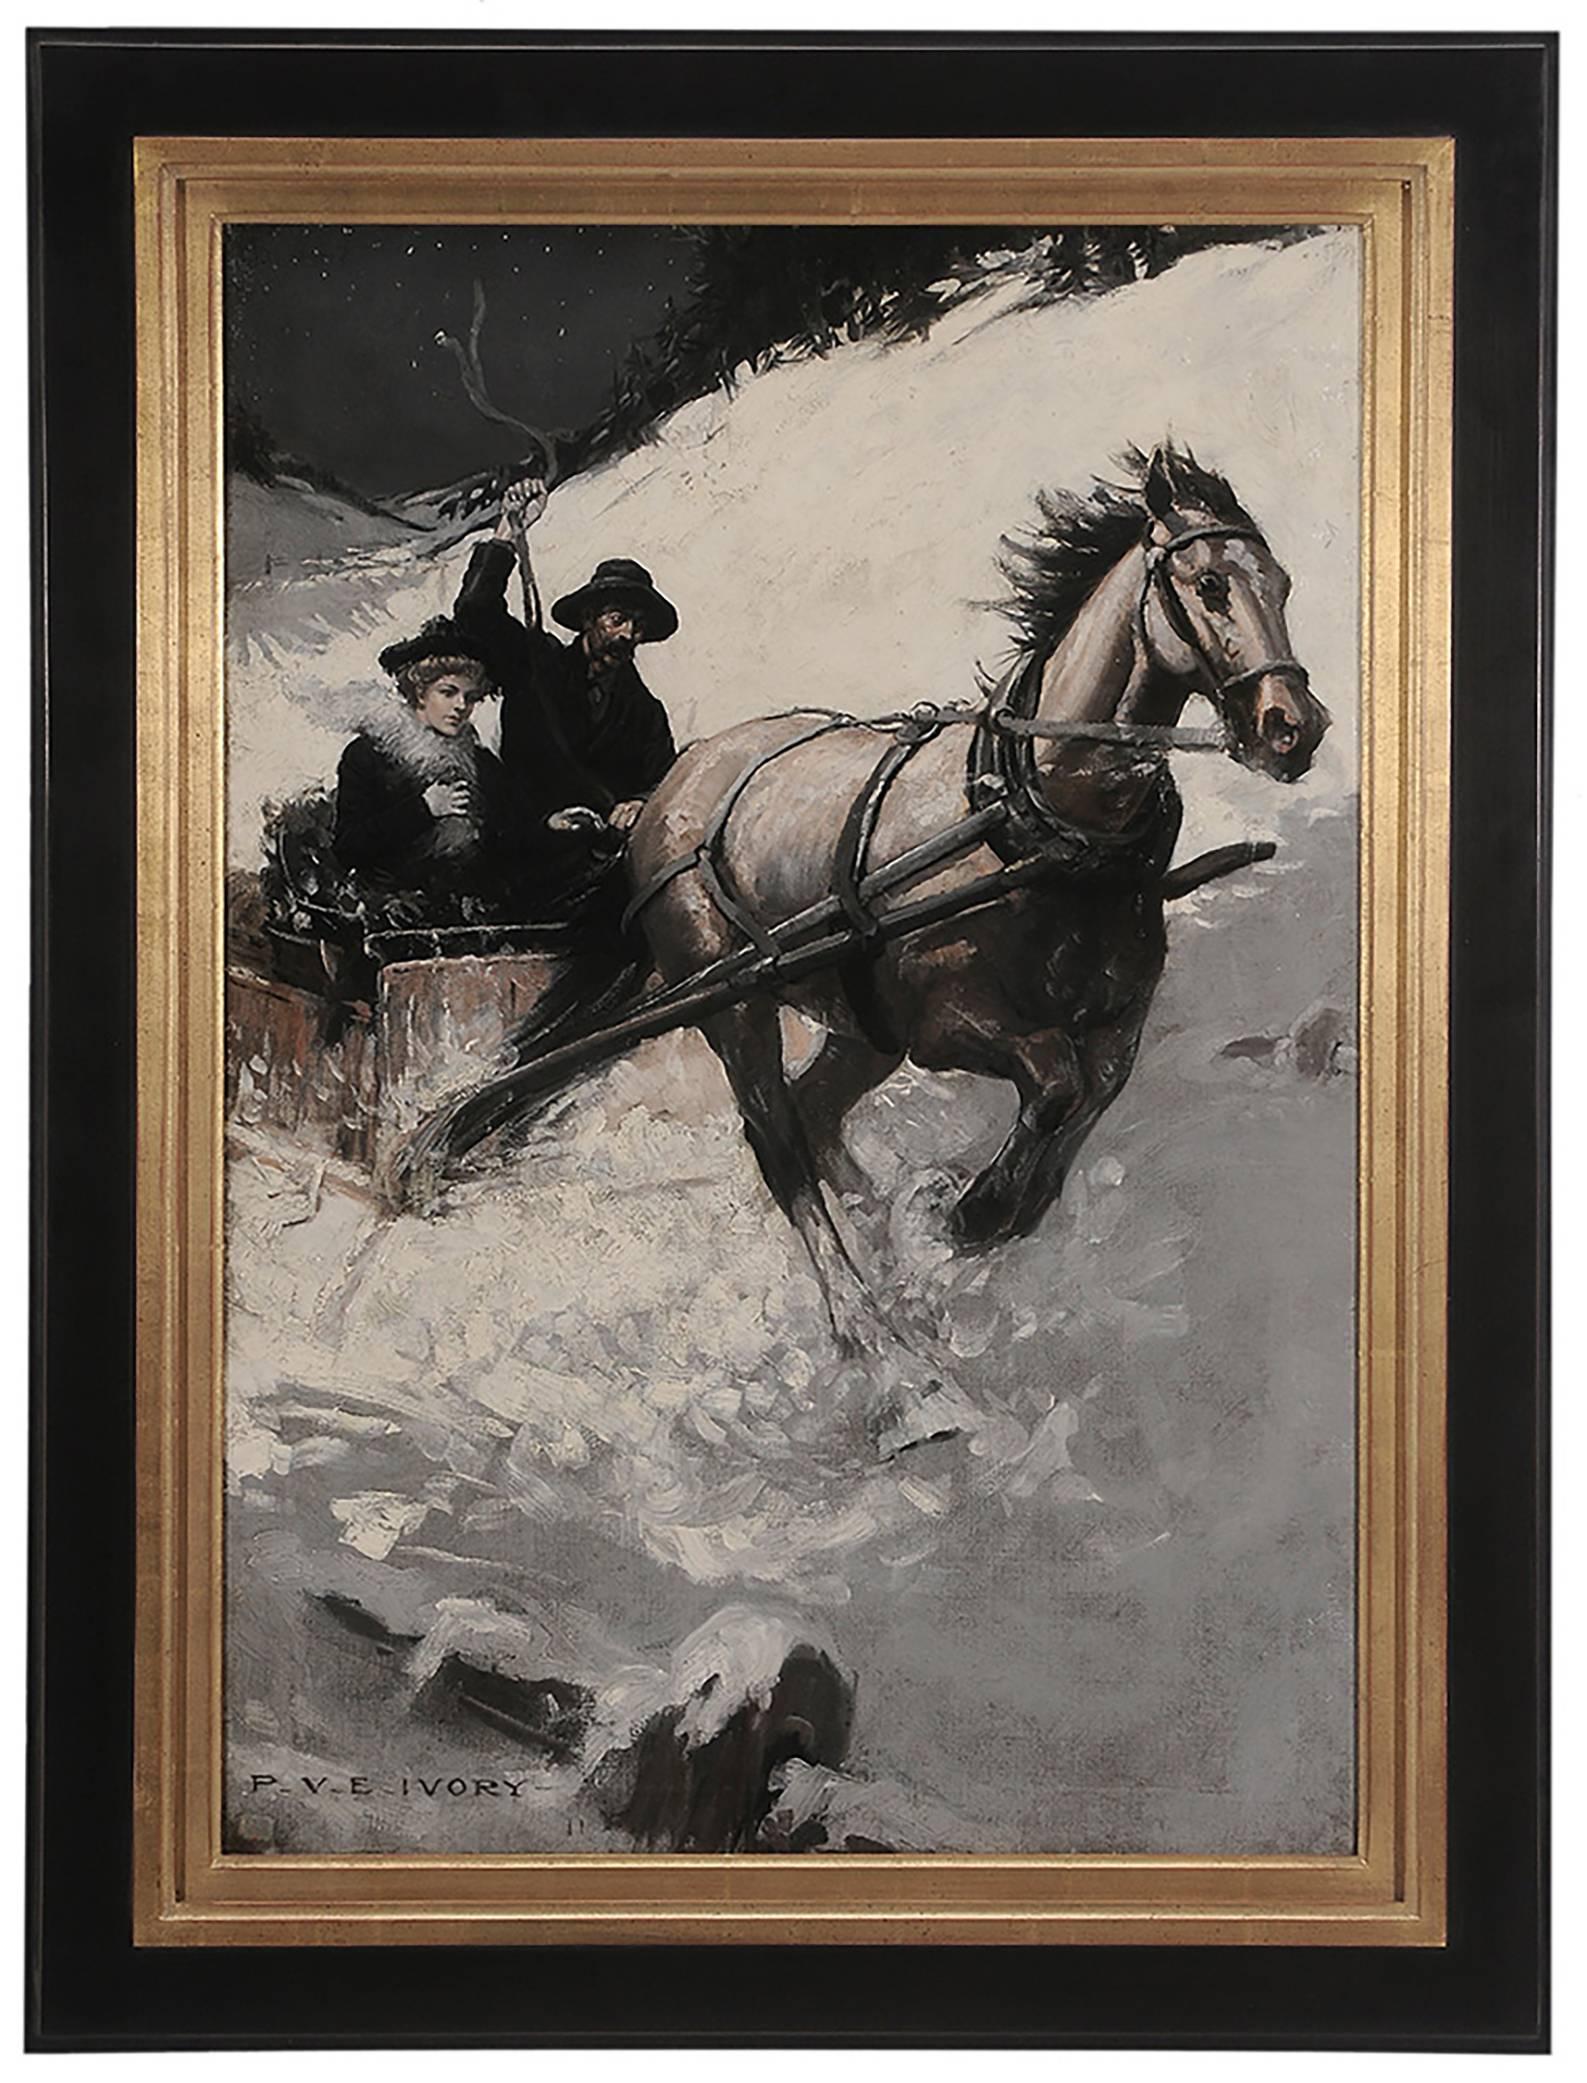 Horse-Drawn Sled Racing down a Snowy Pass - Painting by Percy van Eman Ivory